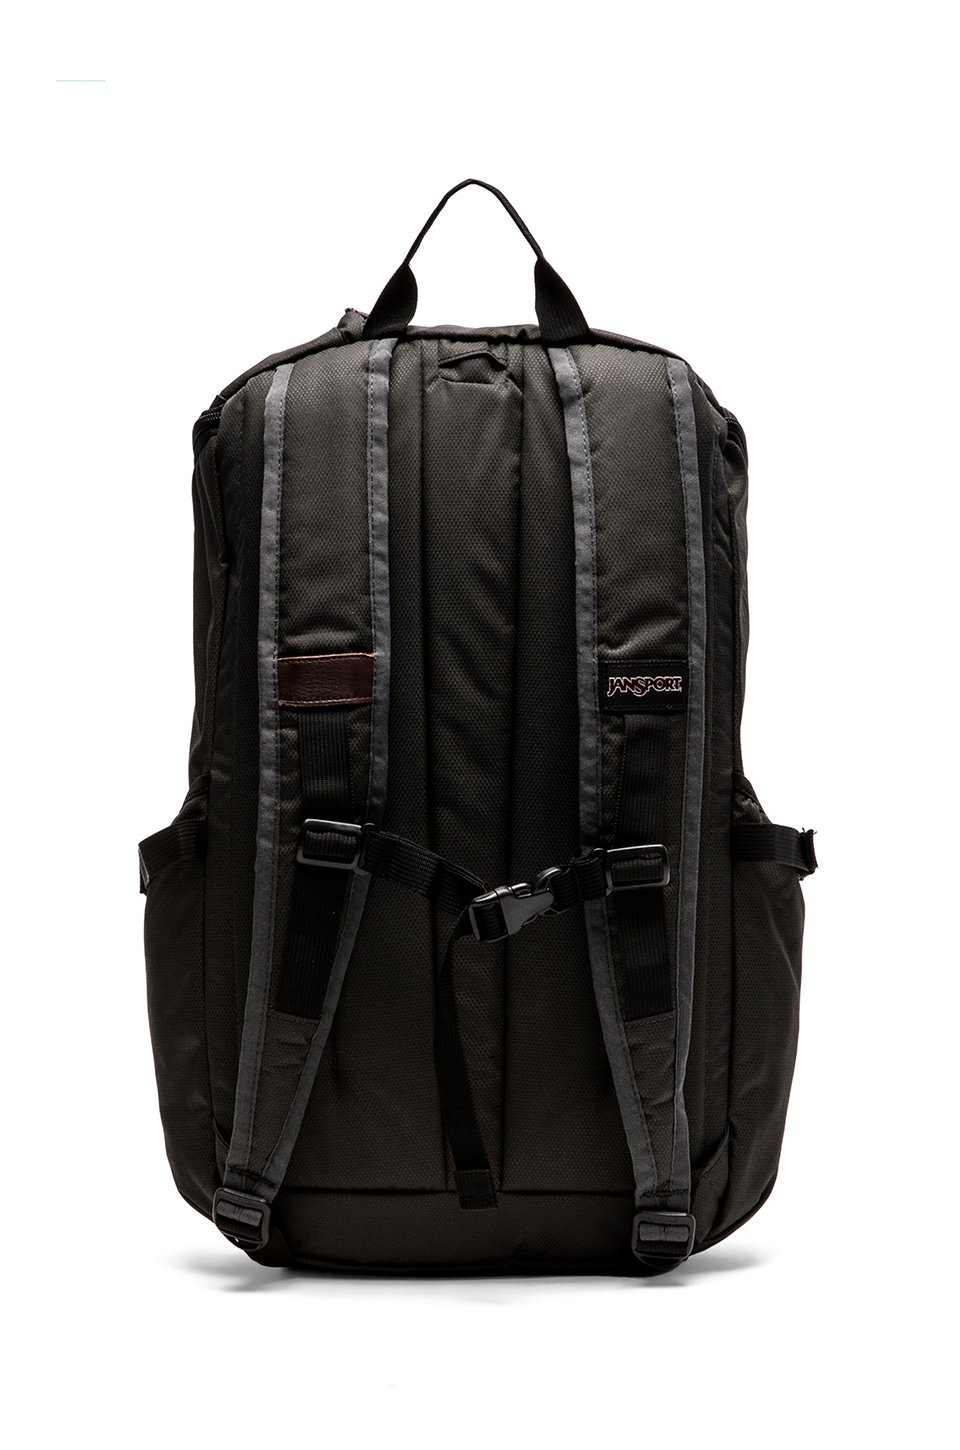 Jansport Watchtower Backpack in Gray for Men - Lyst